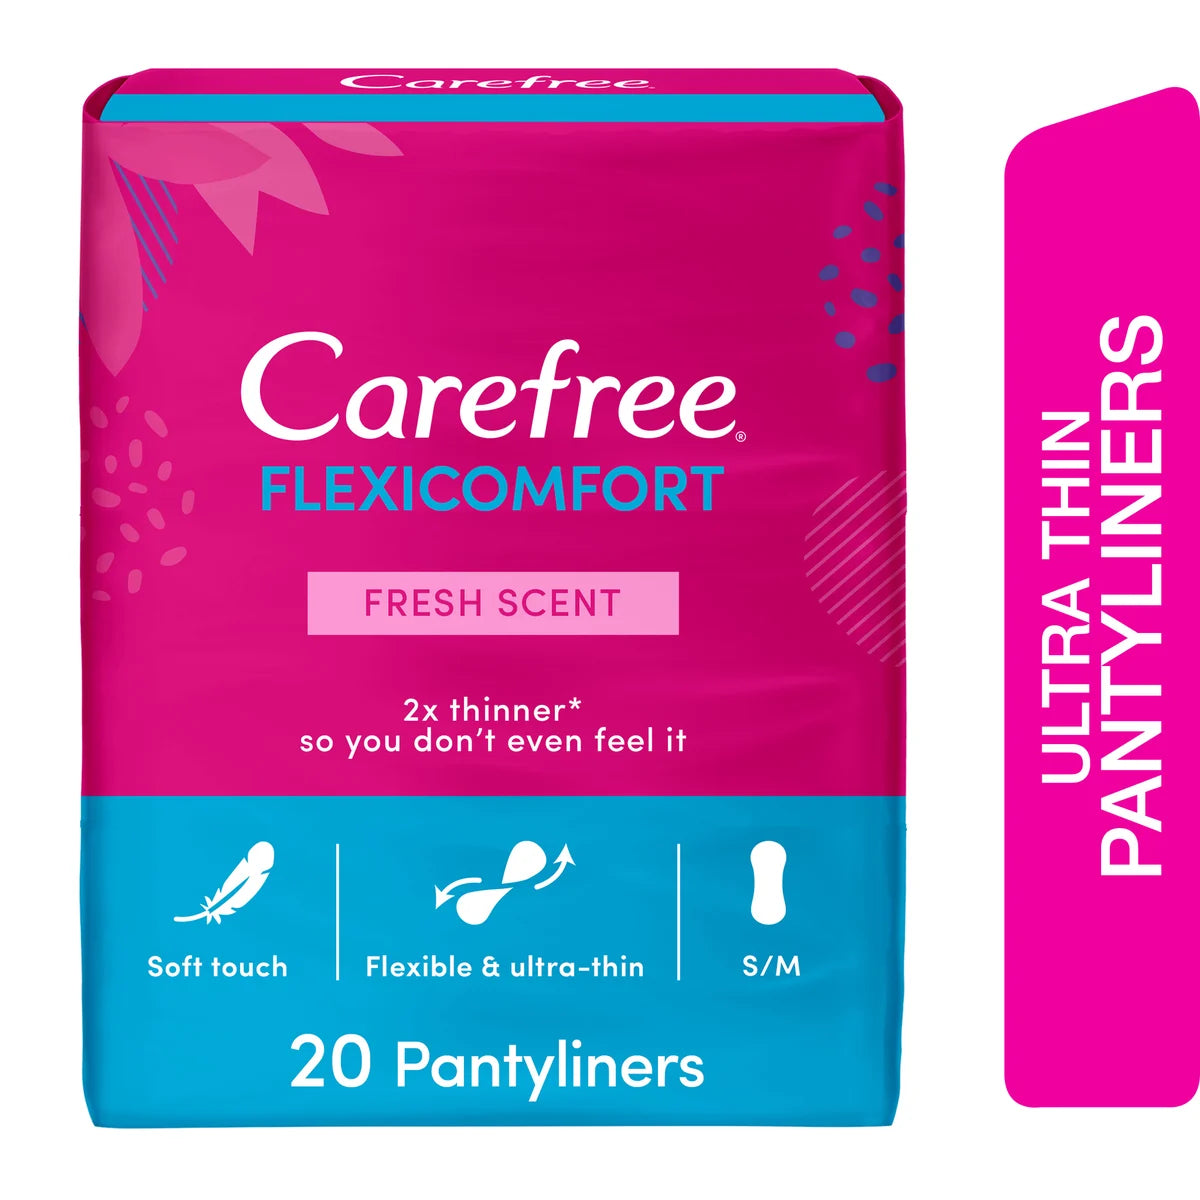 Carefree Panty Liners Flexicomfort Fresh Scent 20Pcs Pantyliners